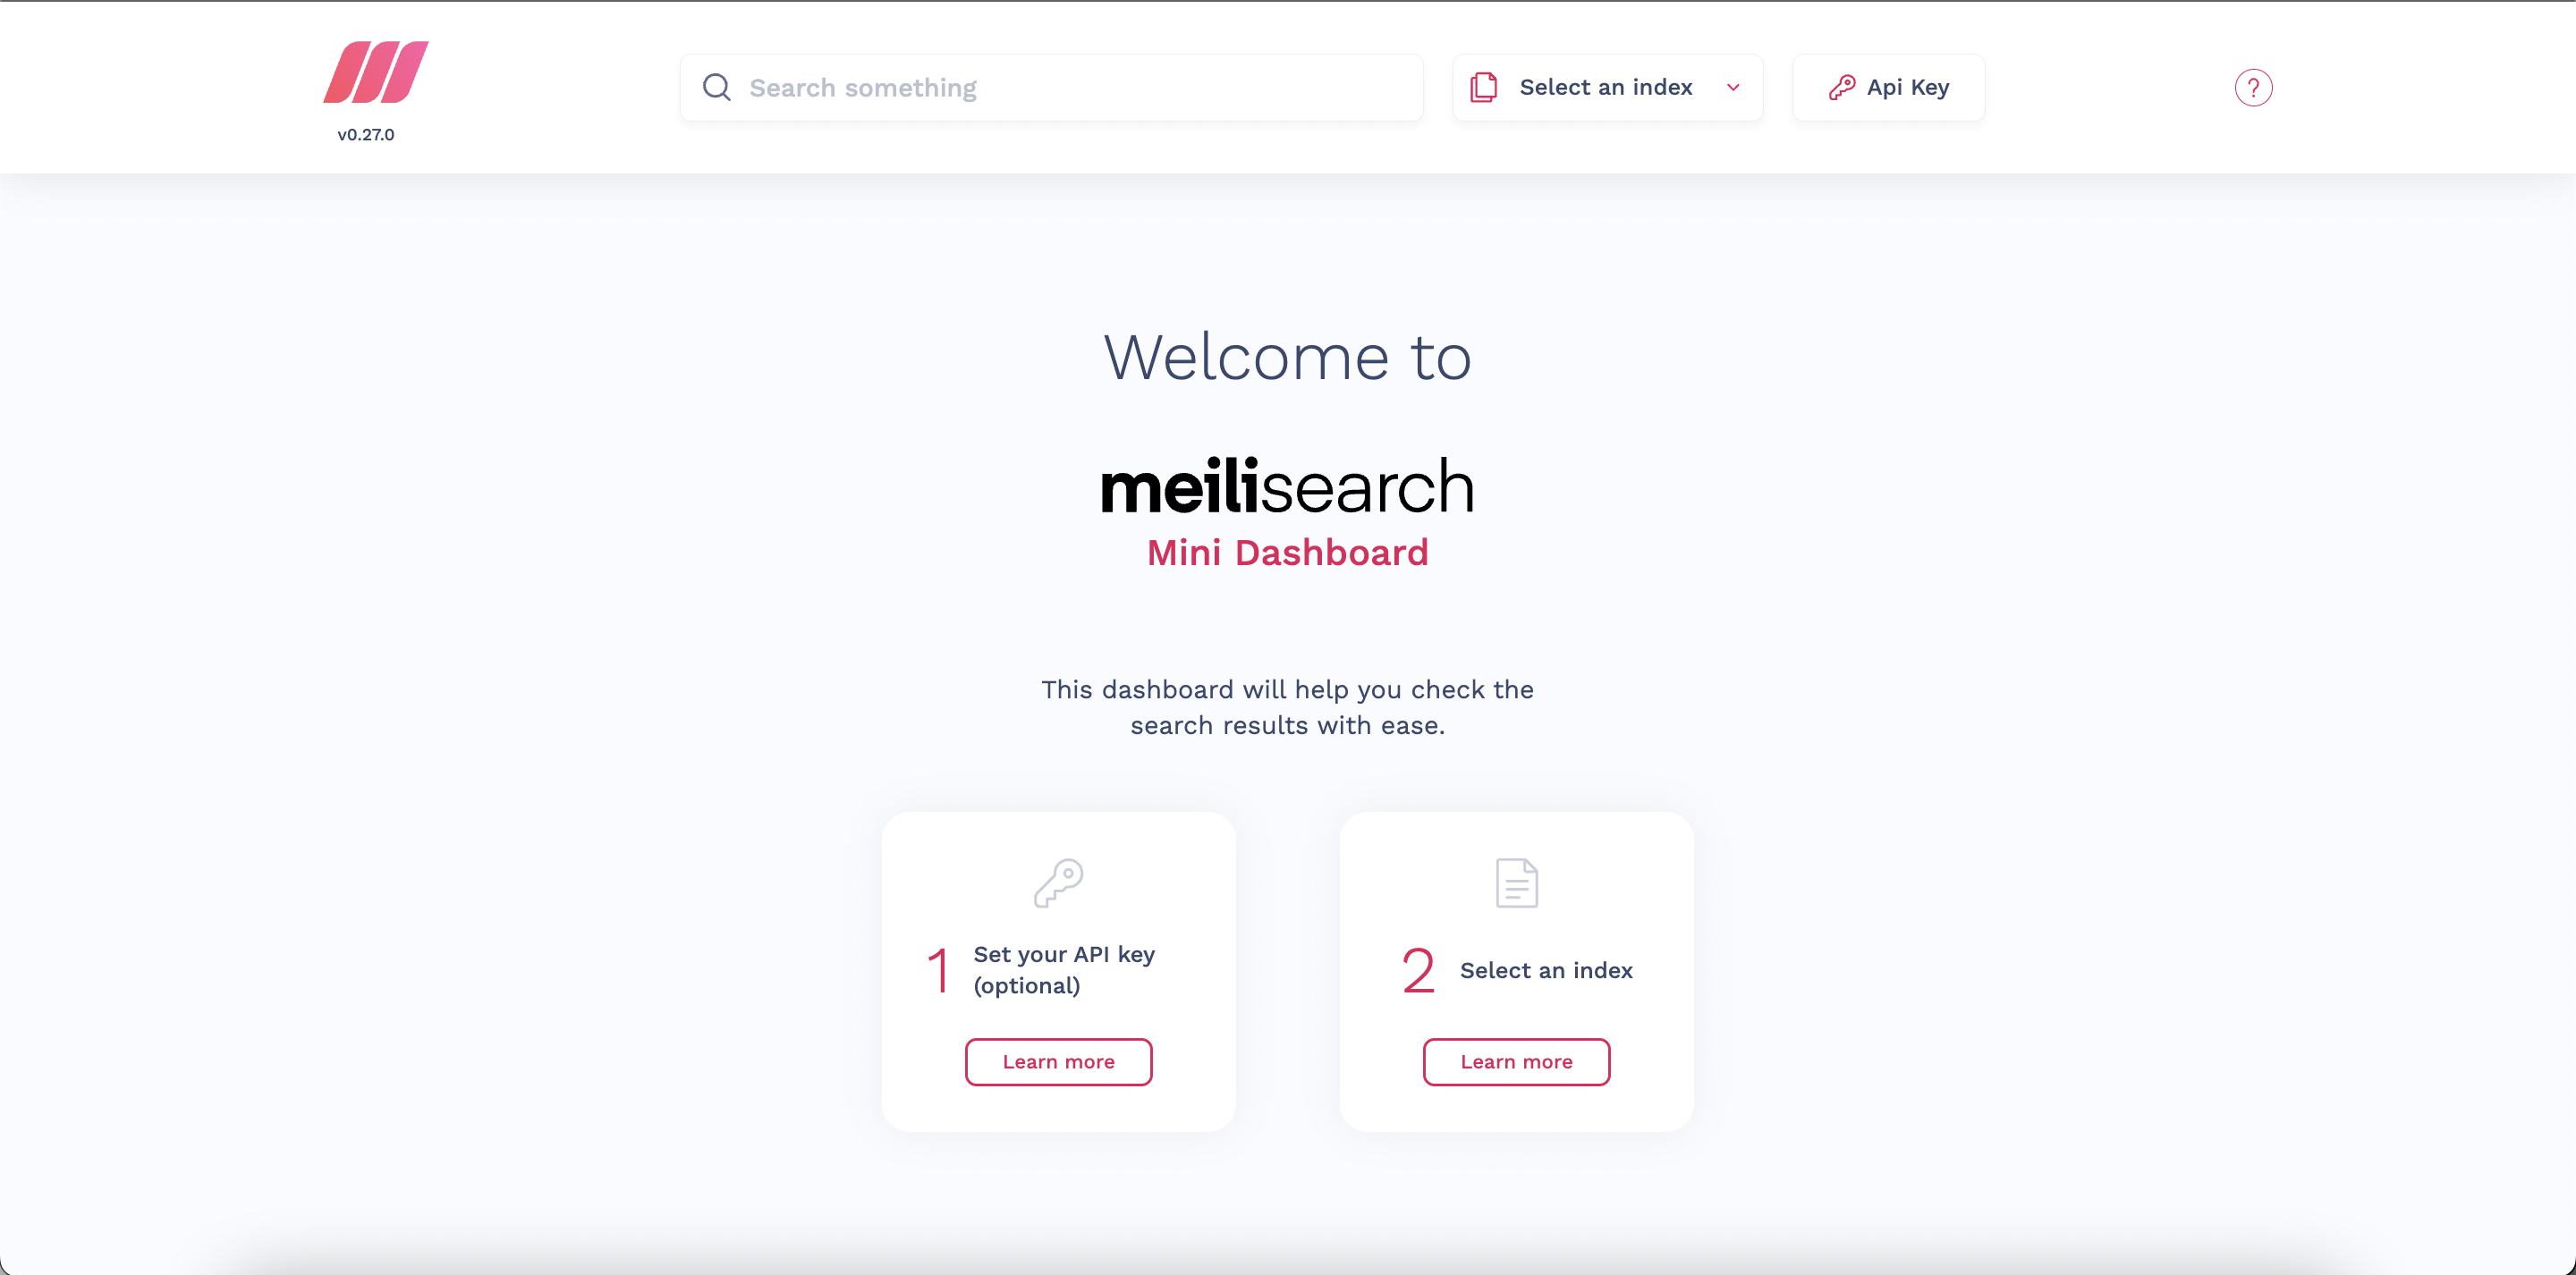 Meilisearch search preview instructing the user to set an API key and configure an index